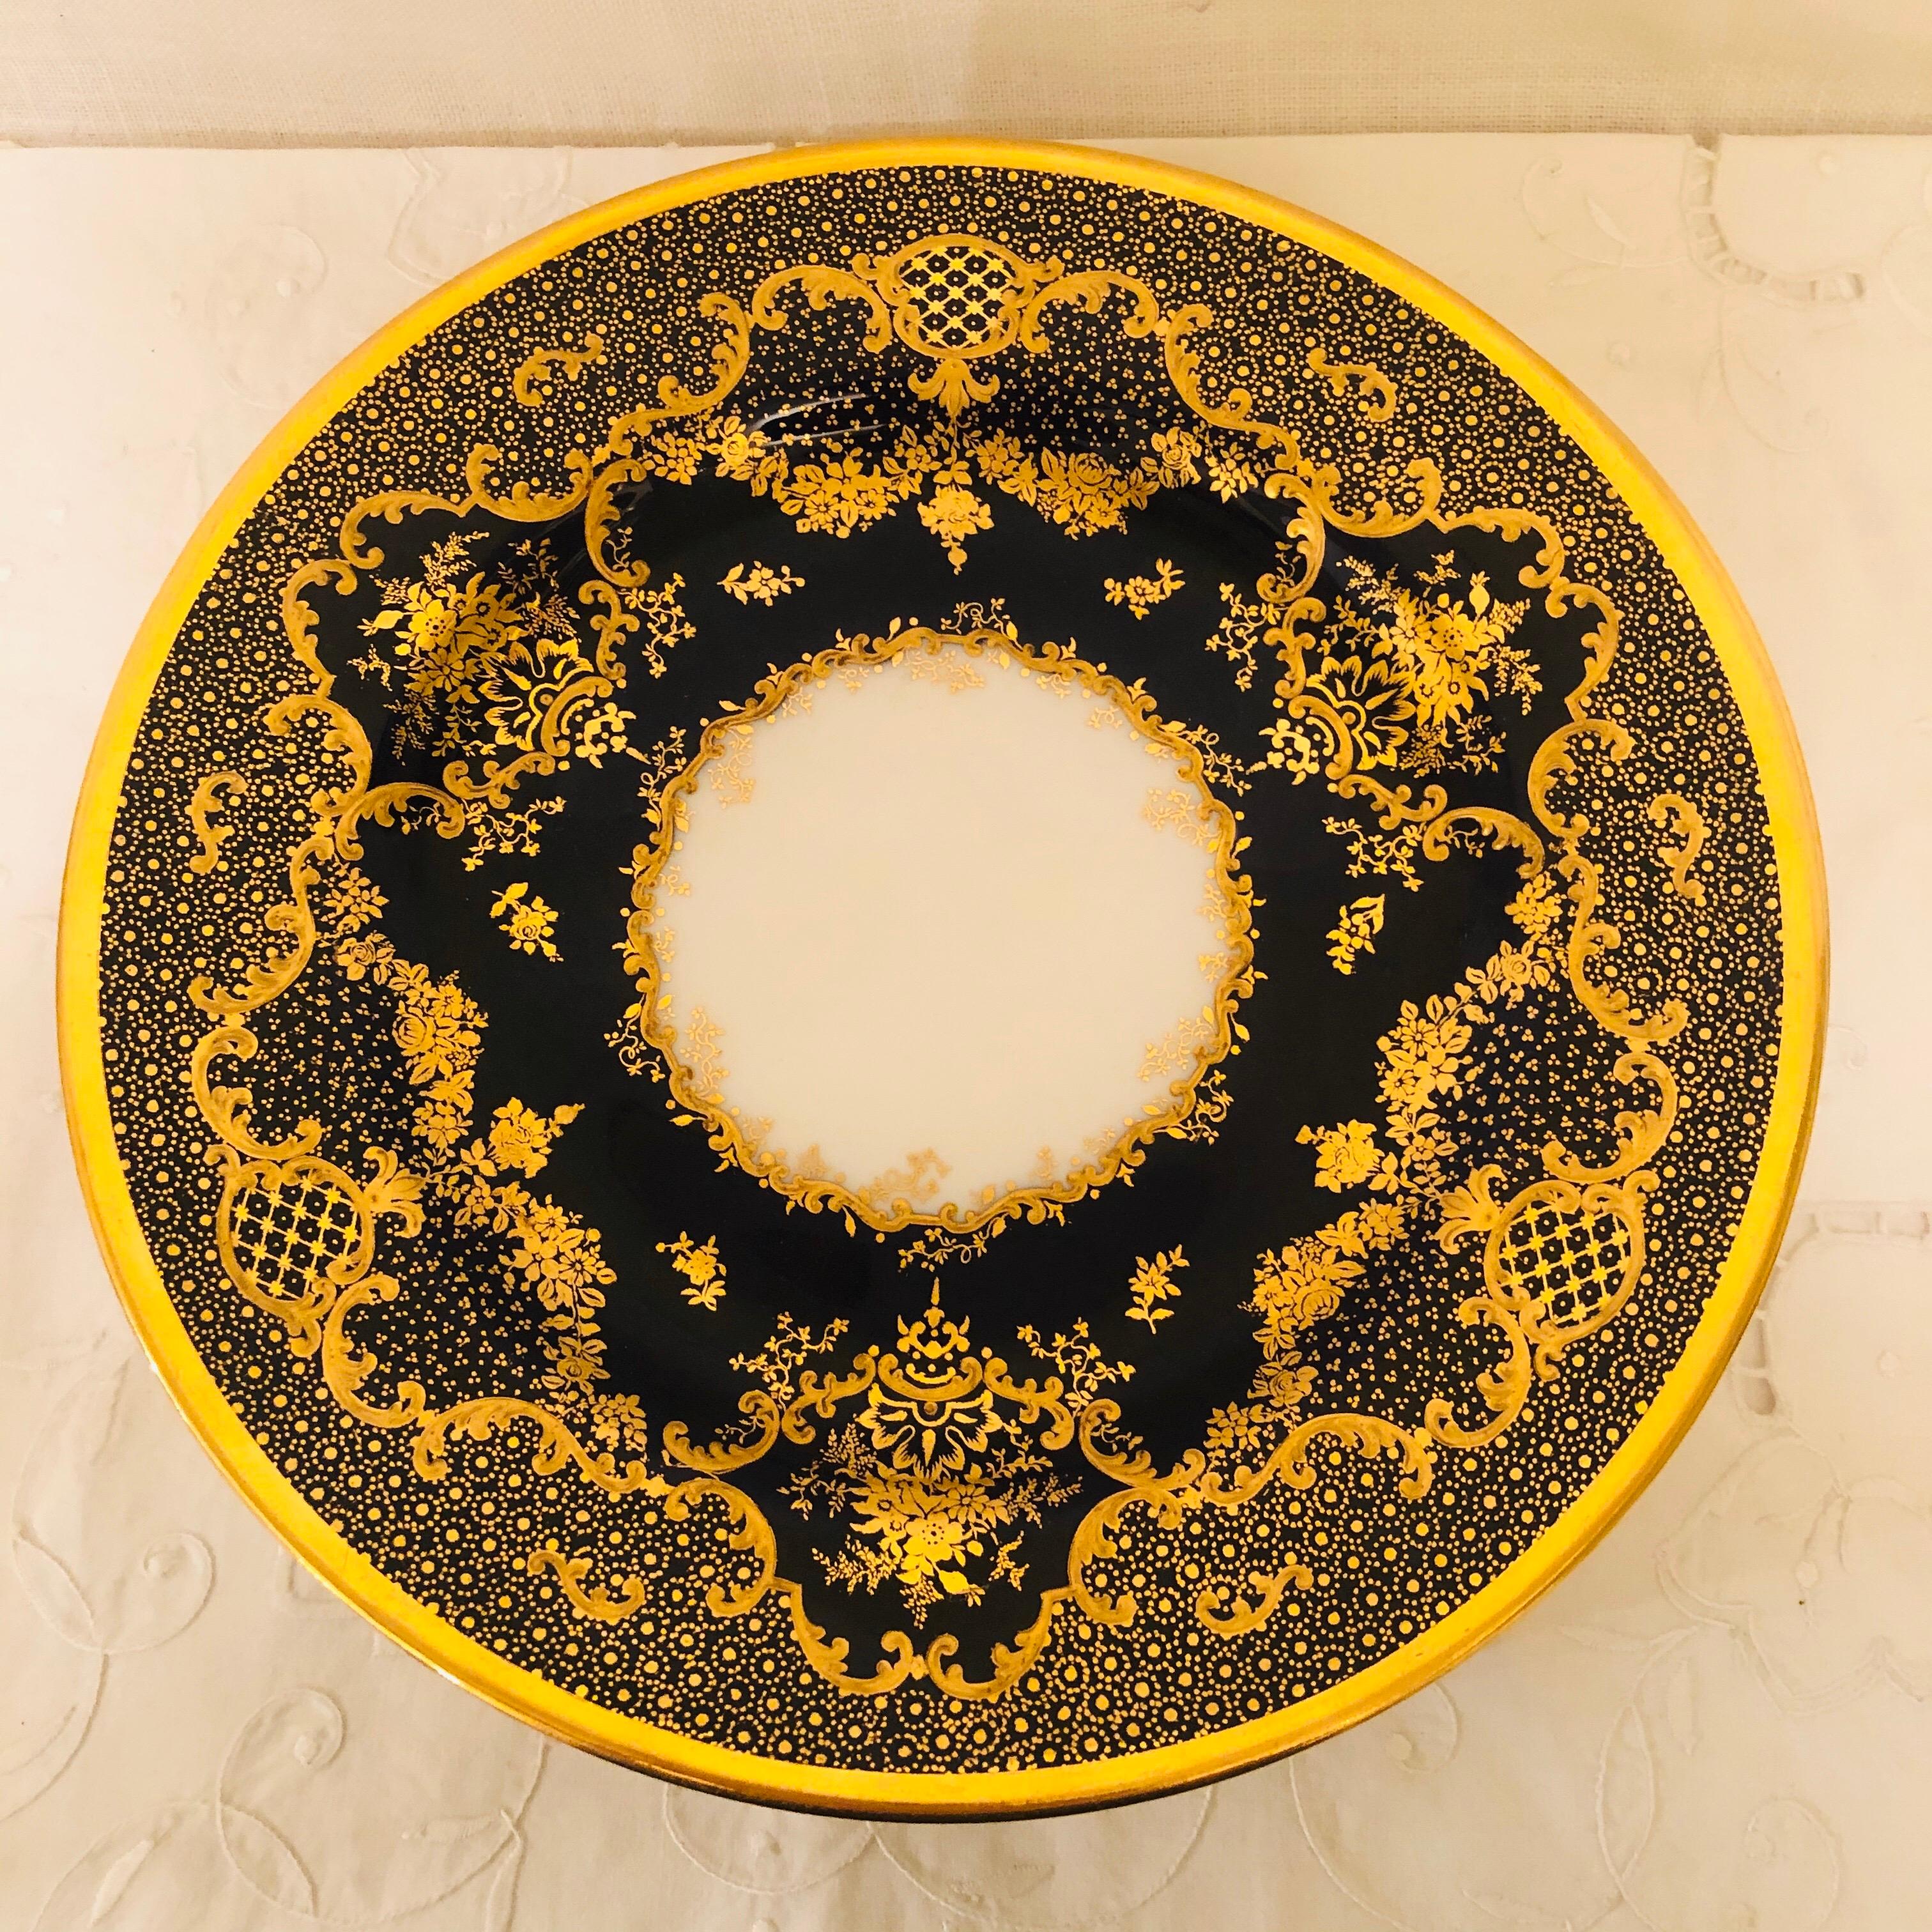 Set of ten cobalt Copeland dessert or luncheon plates with raised gilding on a fluted ribbon border. You can tell that the intricate detailed gilding on these plates has been done by an expert gilder. These plates are special enough to impress all